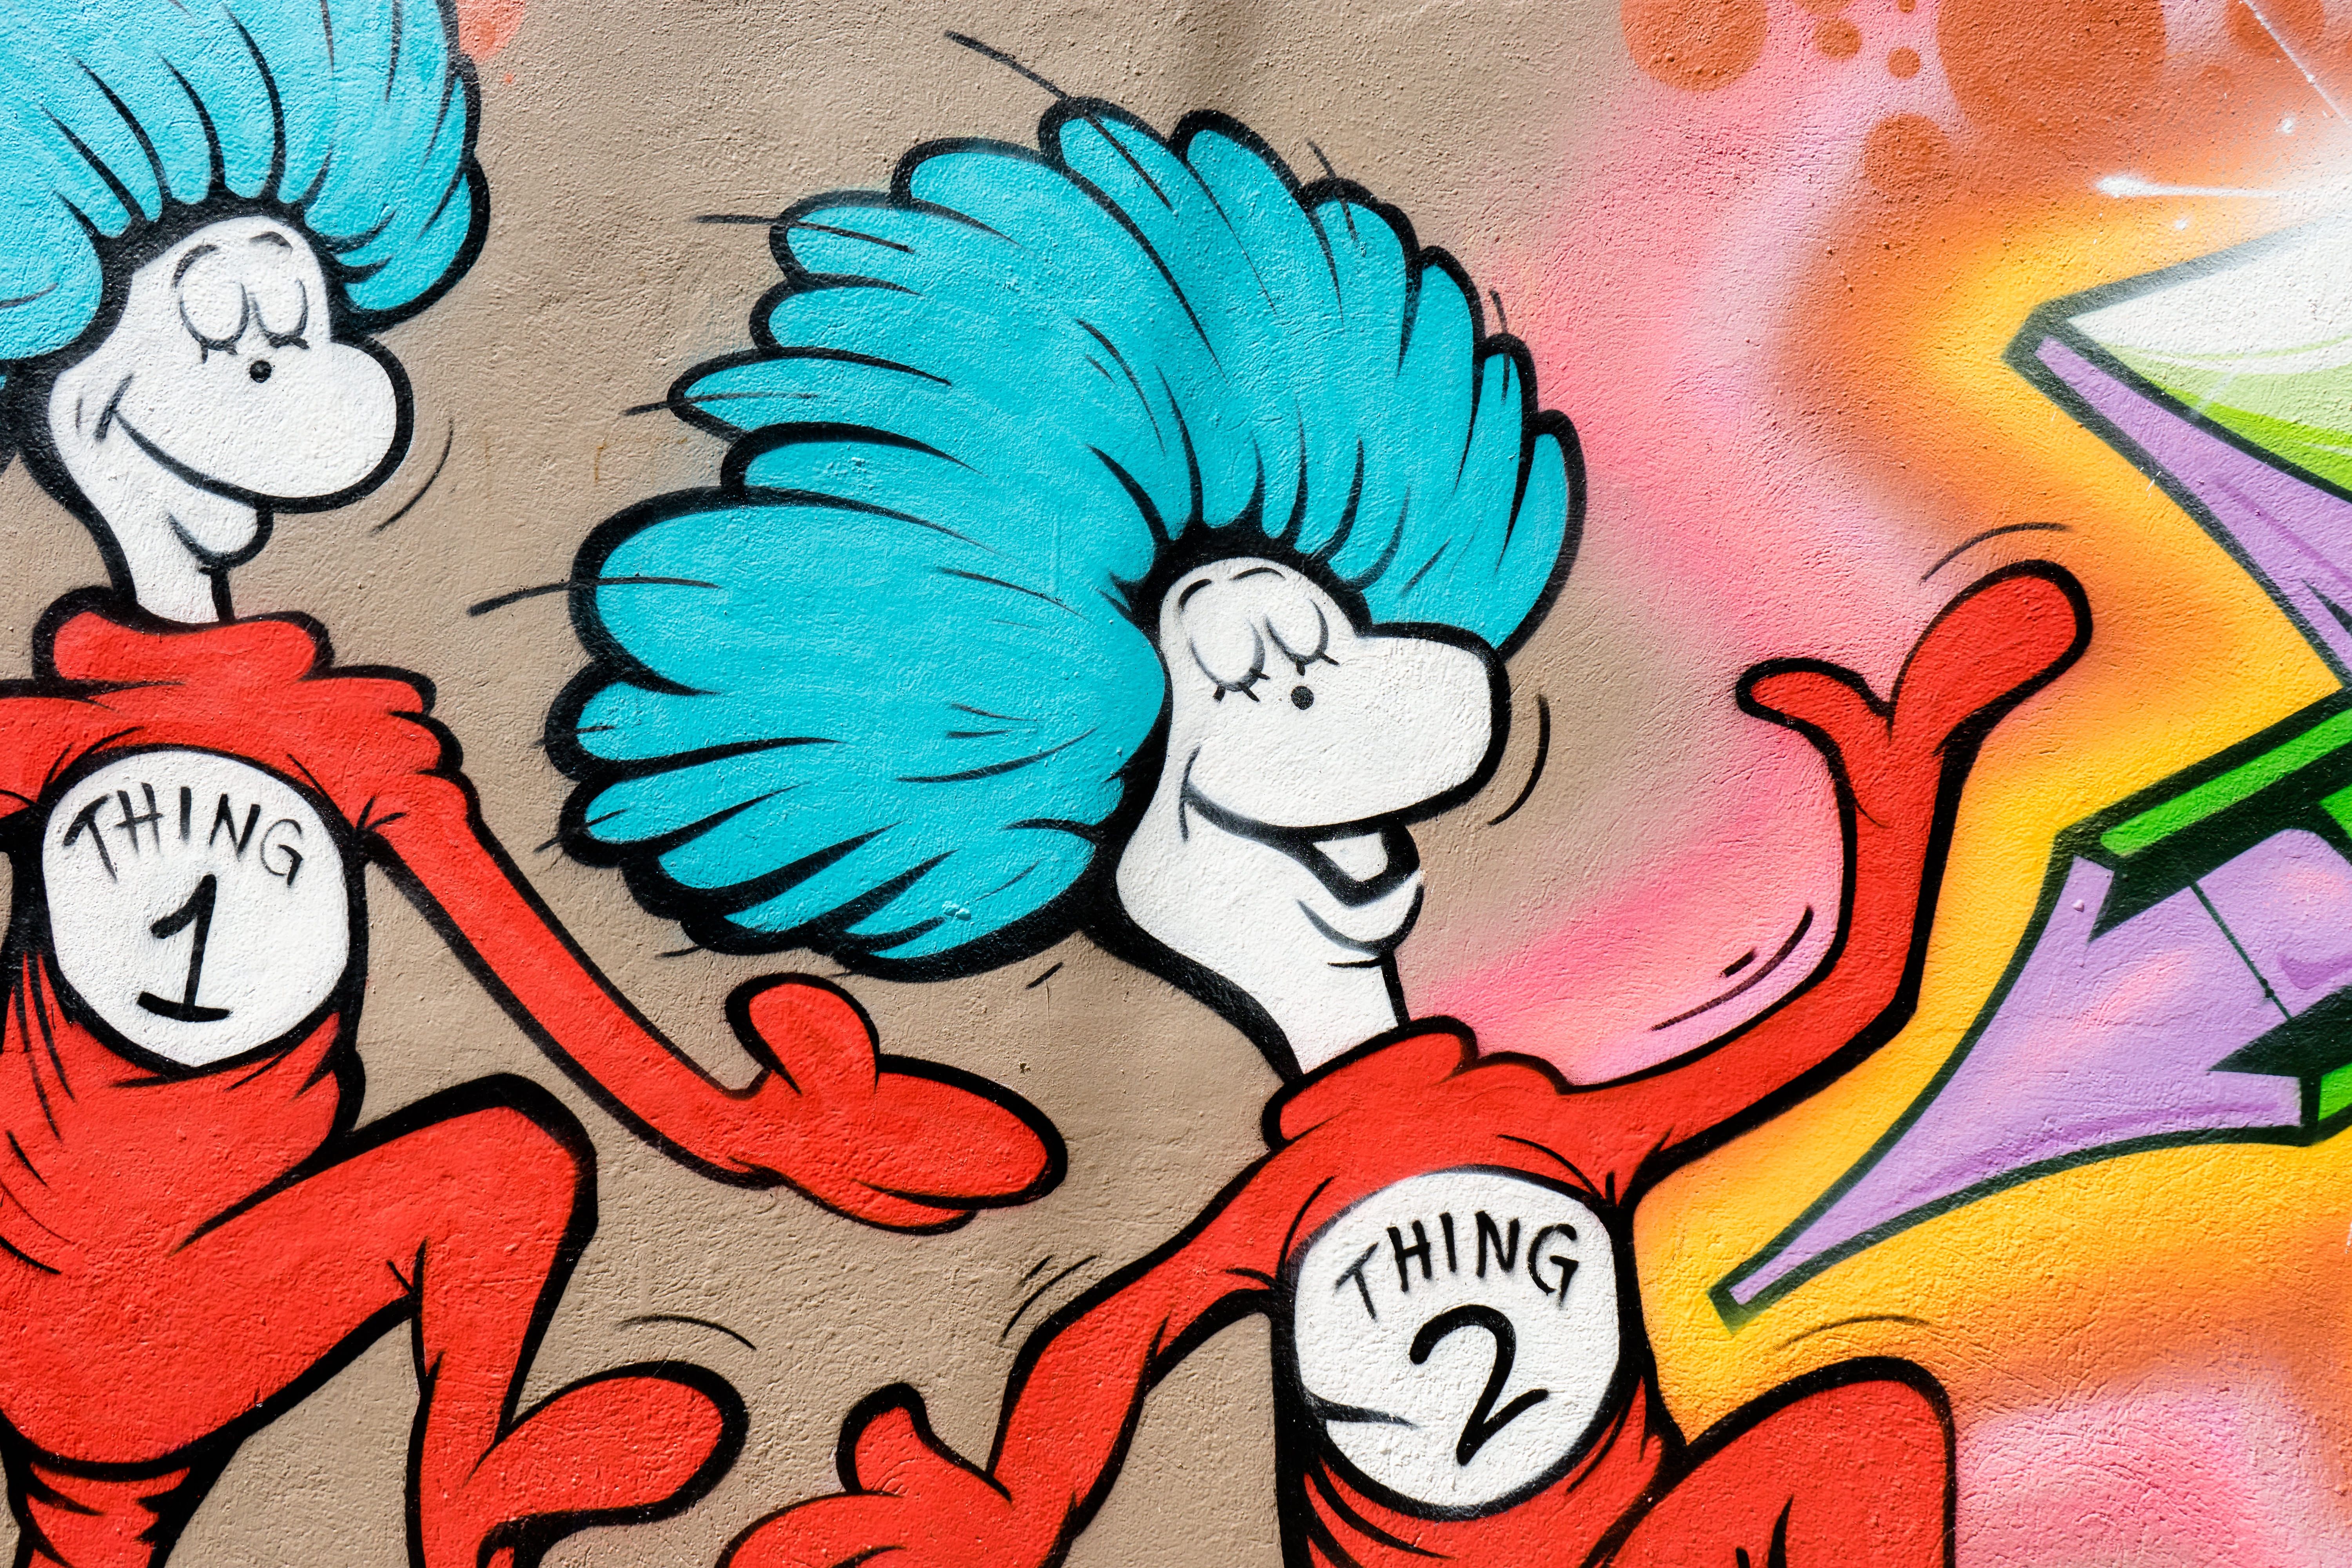 6000x4000 #mural, #art, #draw, #cute background, #graffito, # wallpaper, #funny wallpaper, #colorful, #texture, #wall, #vivid, #graffiti, #grafitti wall, #cute wallpaper, #PNG image, #doodle, #funny background, #doodleing, #thing 1